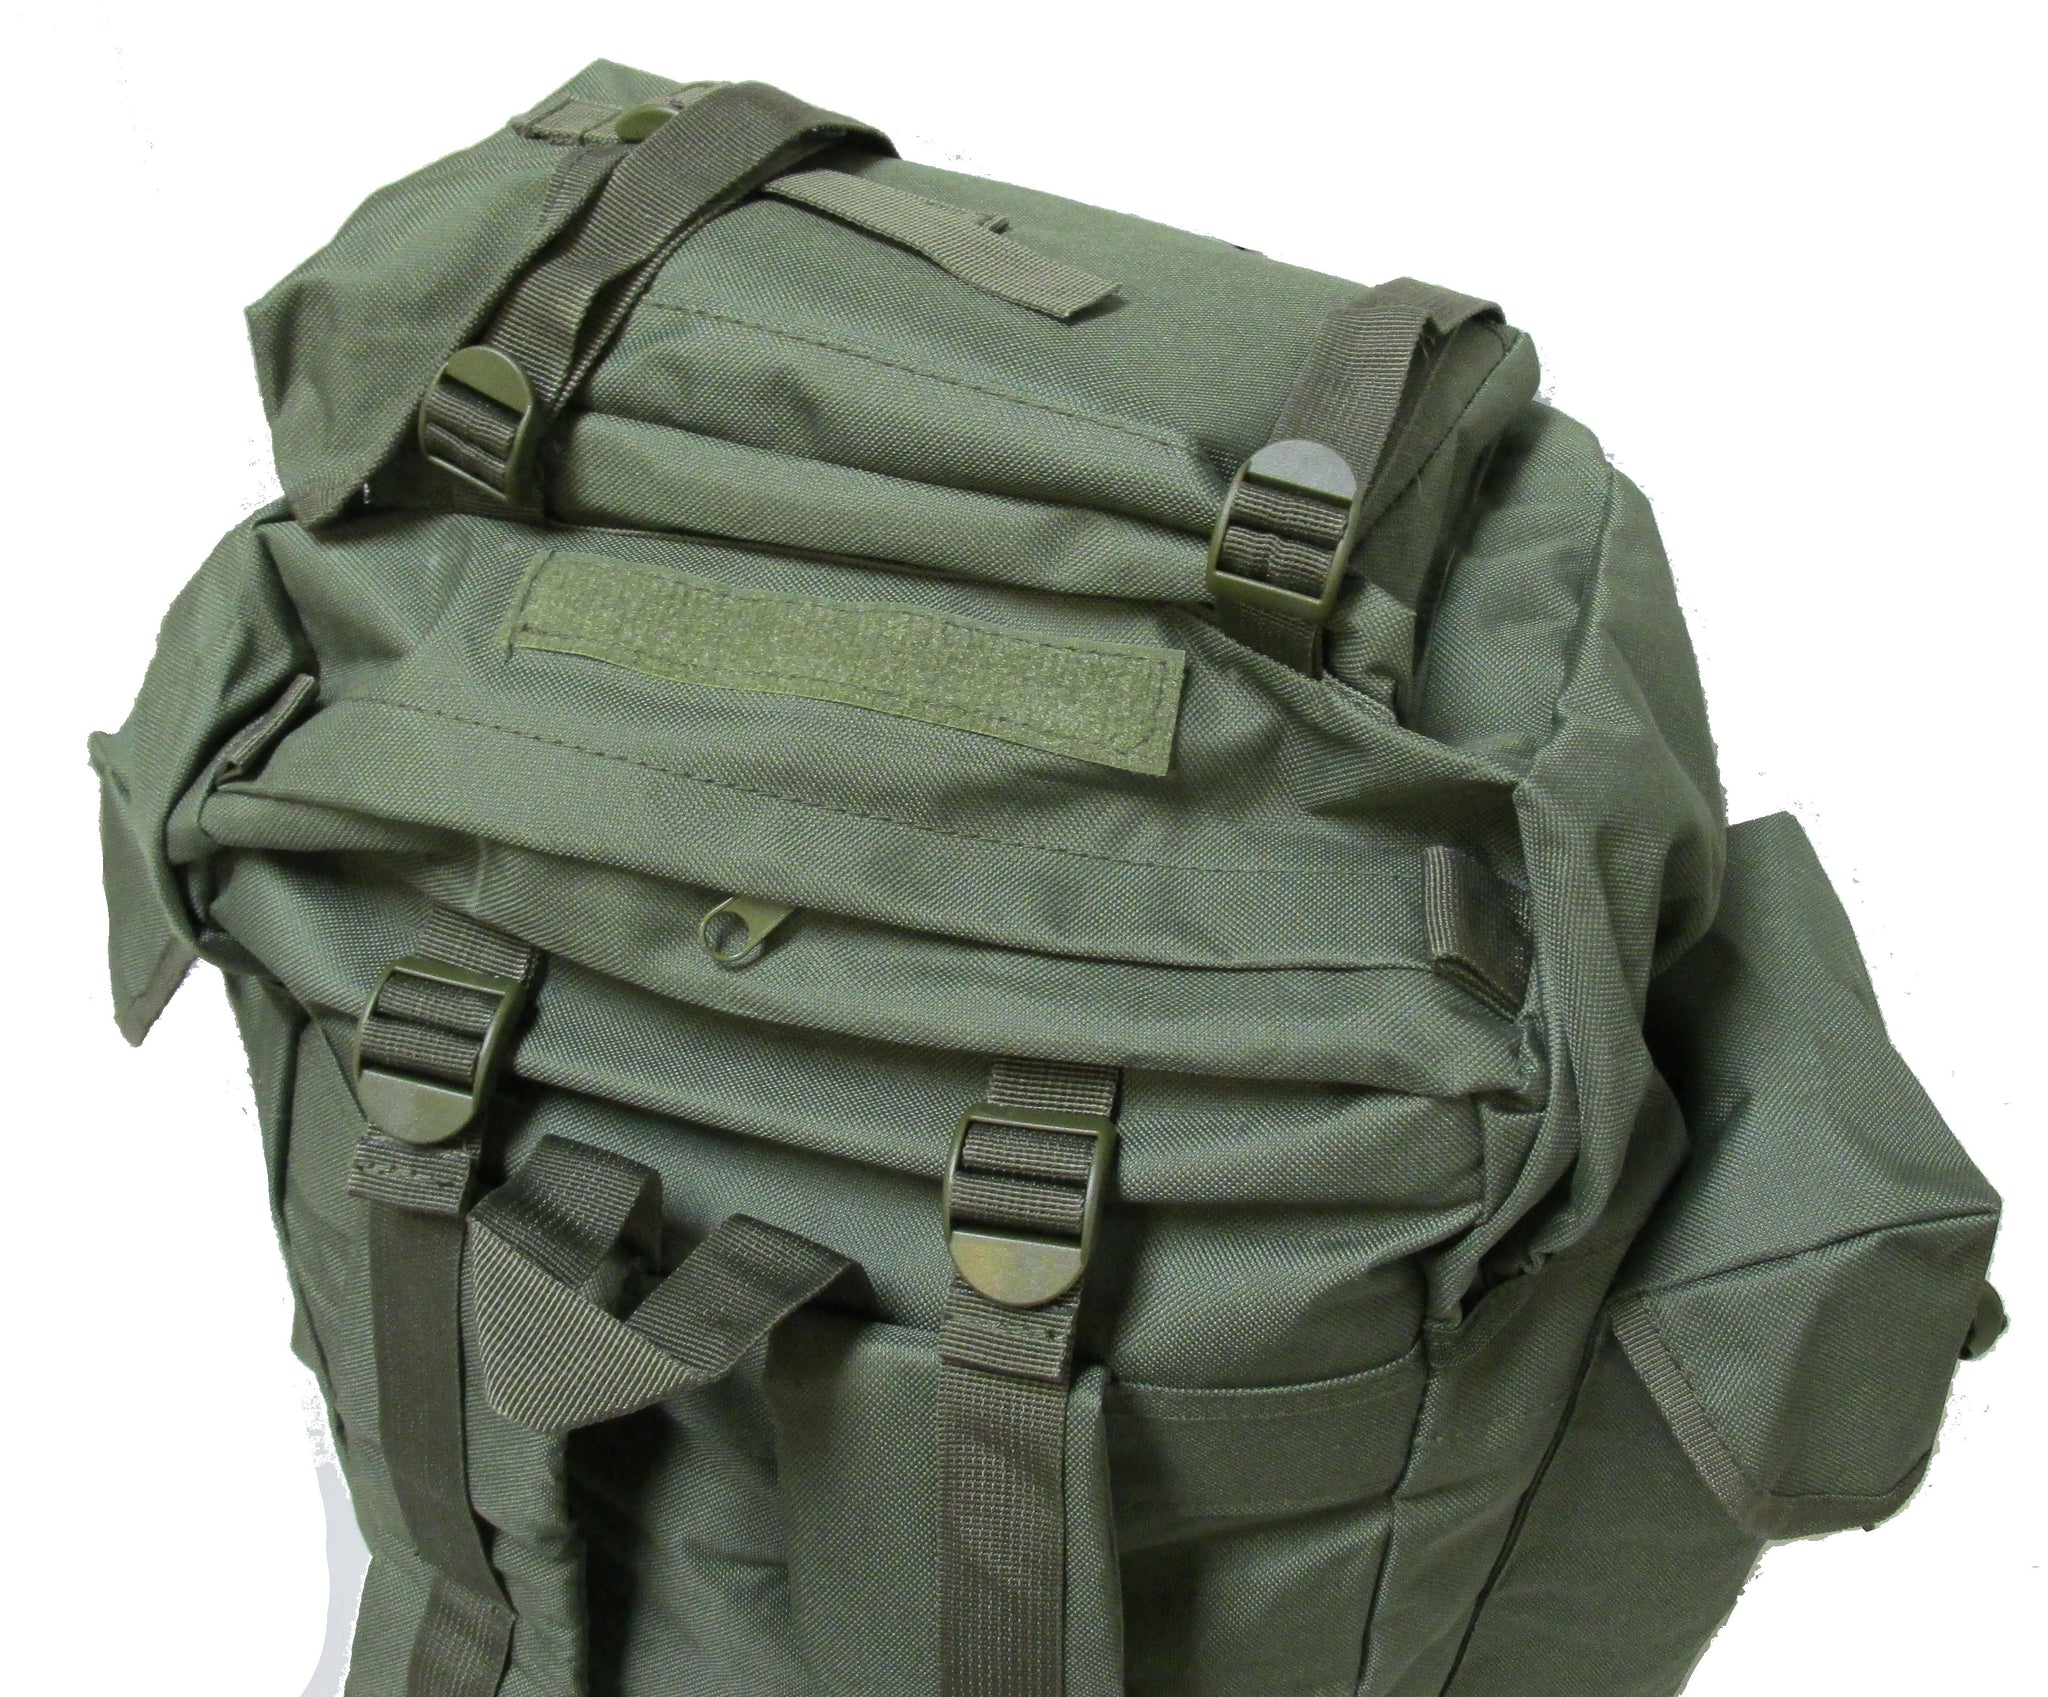 Military Uniform Supply Army Style Combat Rucksack - OLIVE DRAB ...